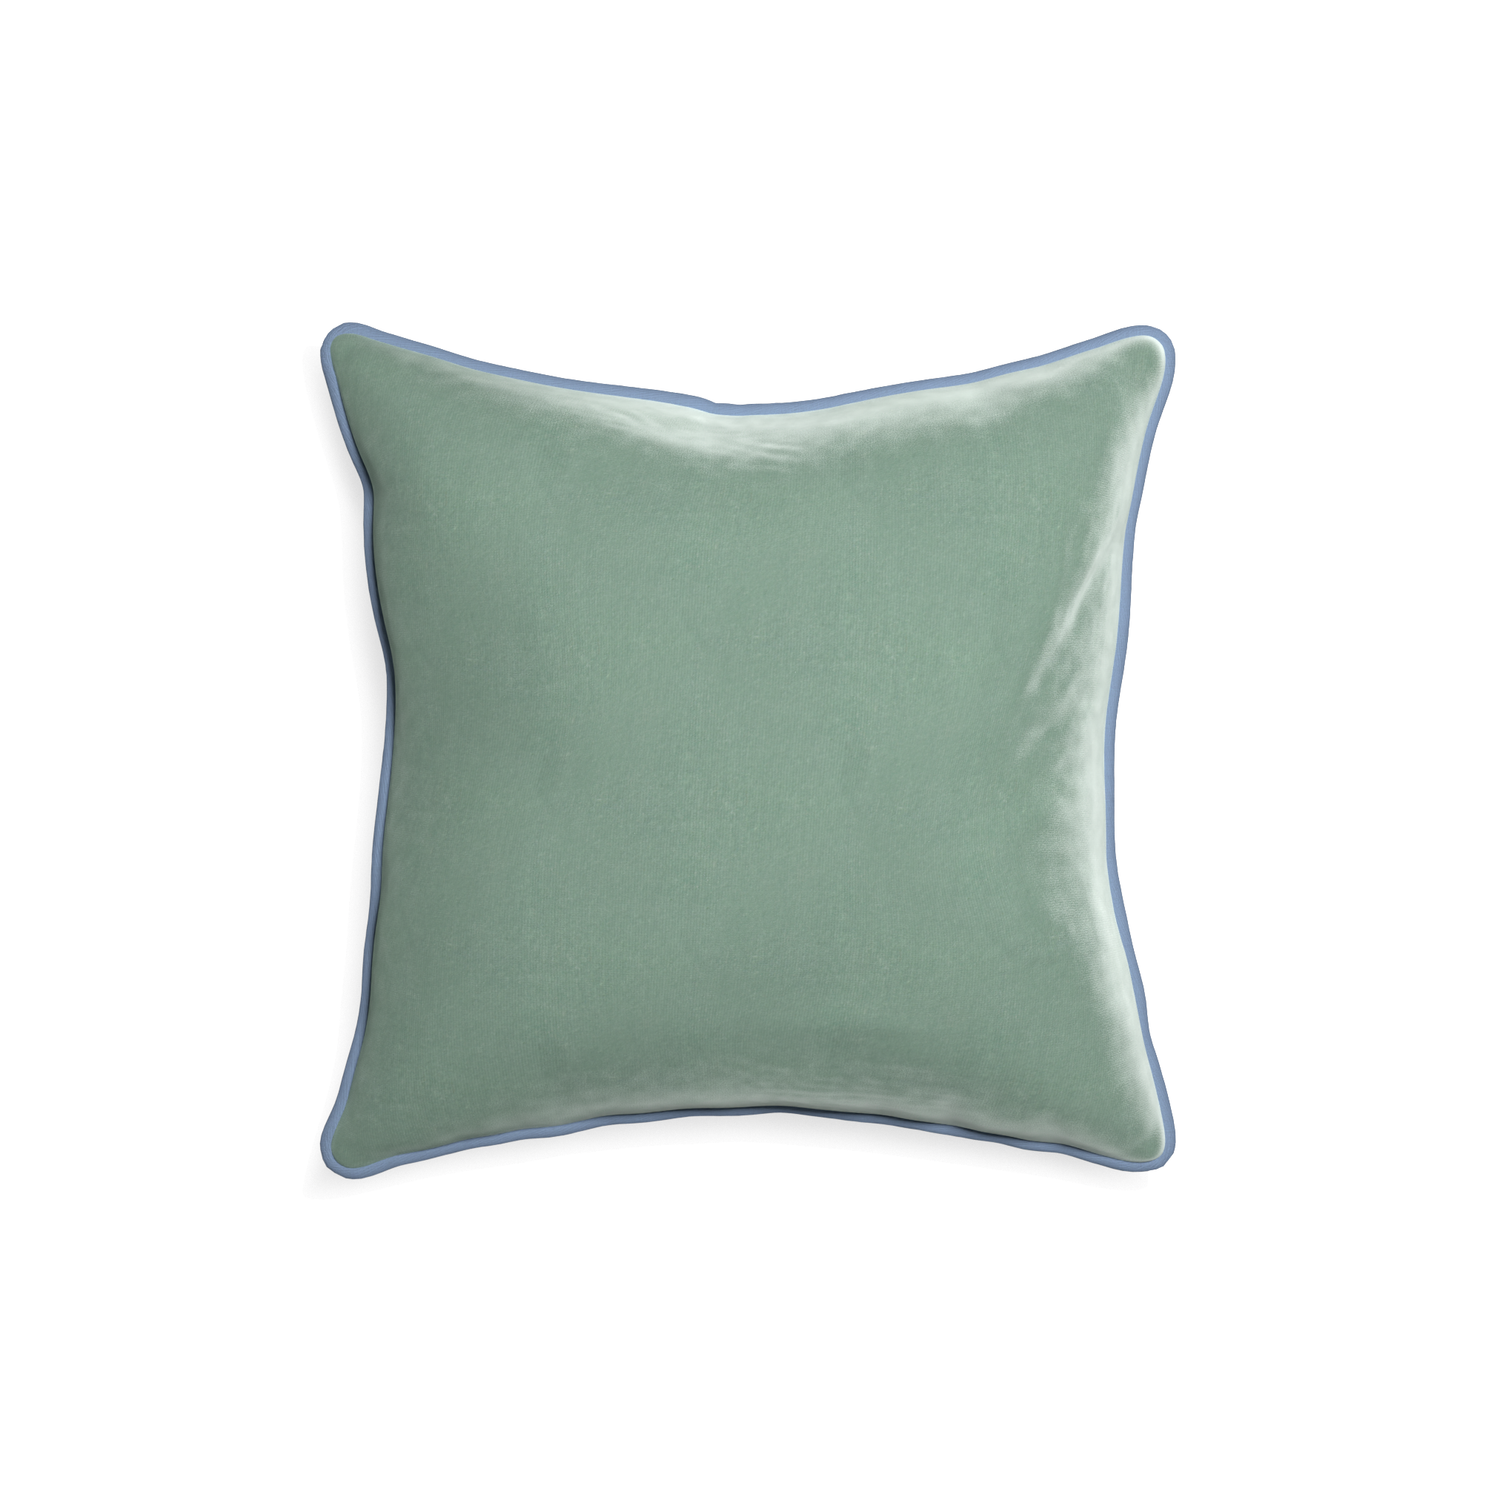 square blue green velvet pillow with sky blue piping